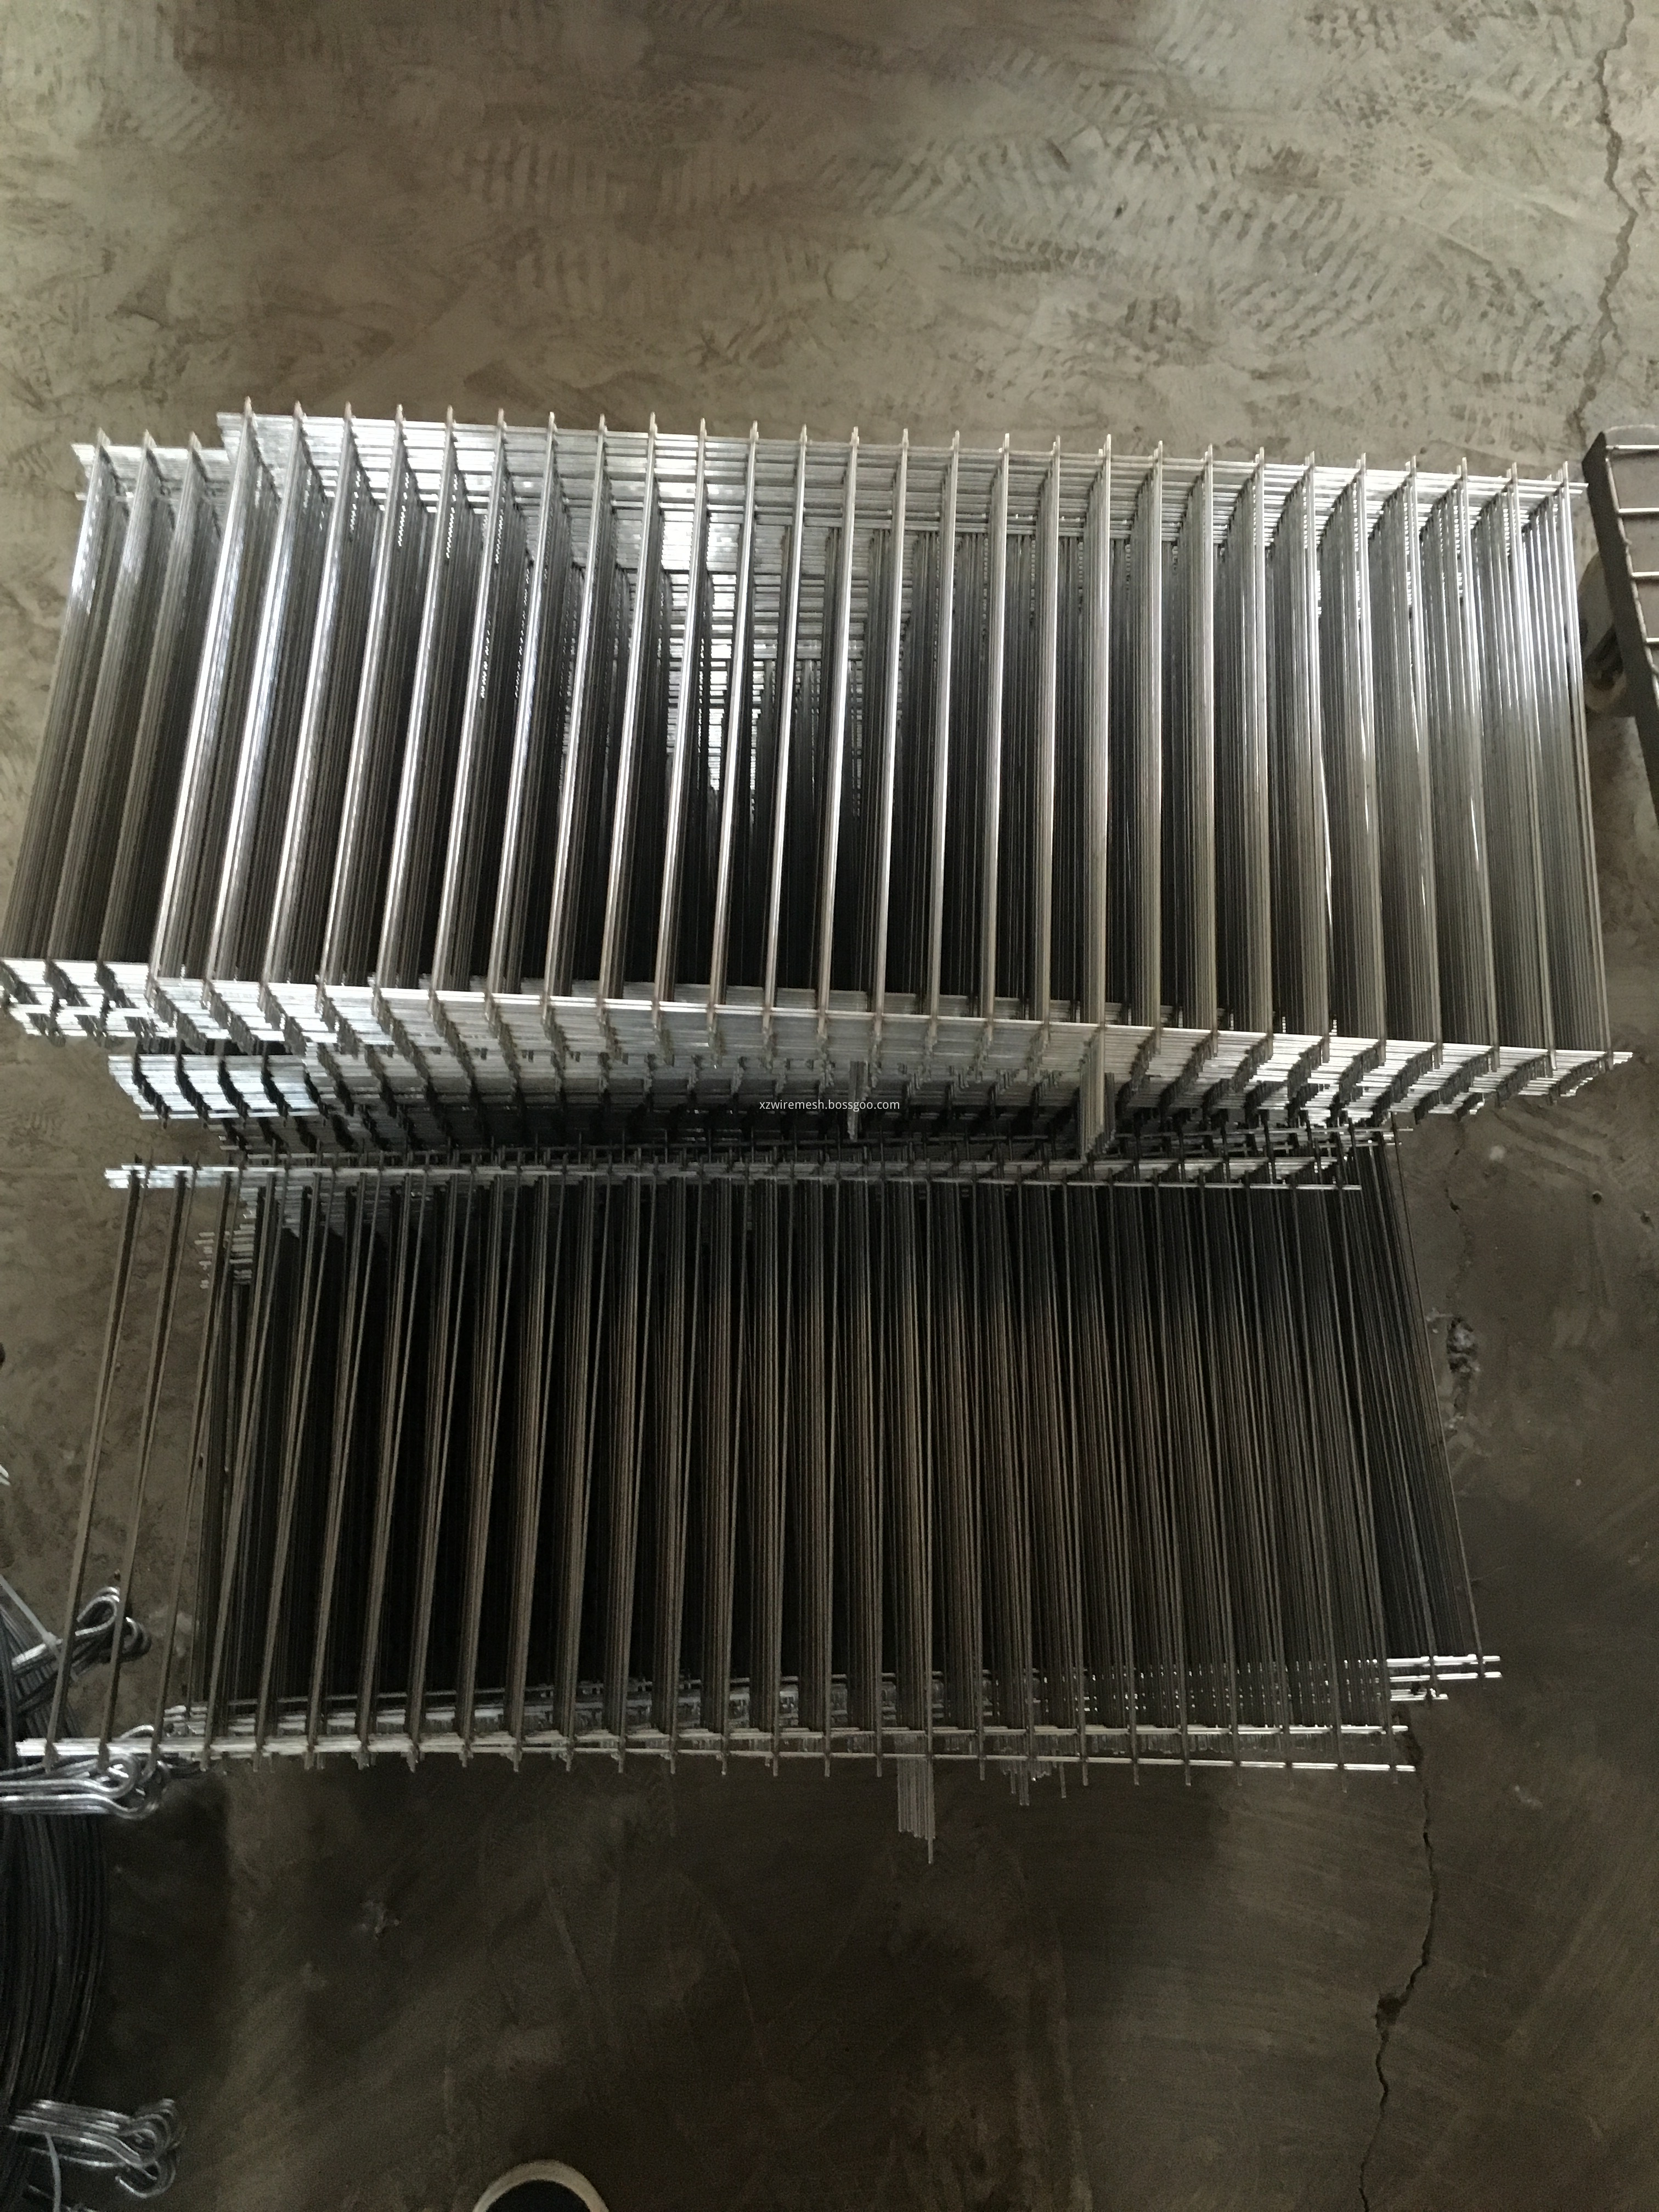 Stainless Steel BBQ Mesh